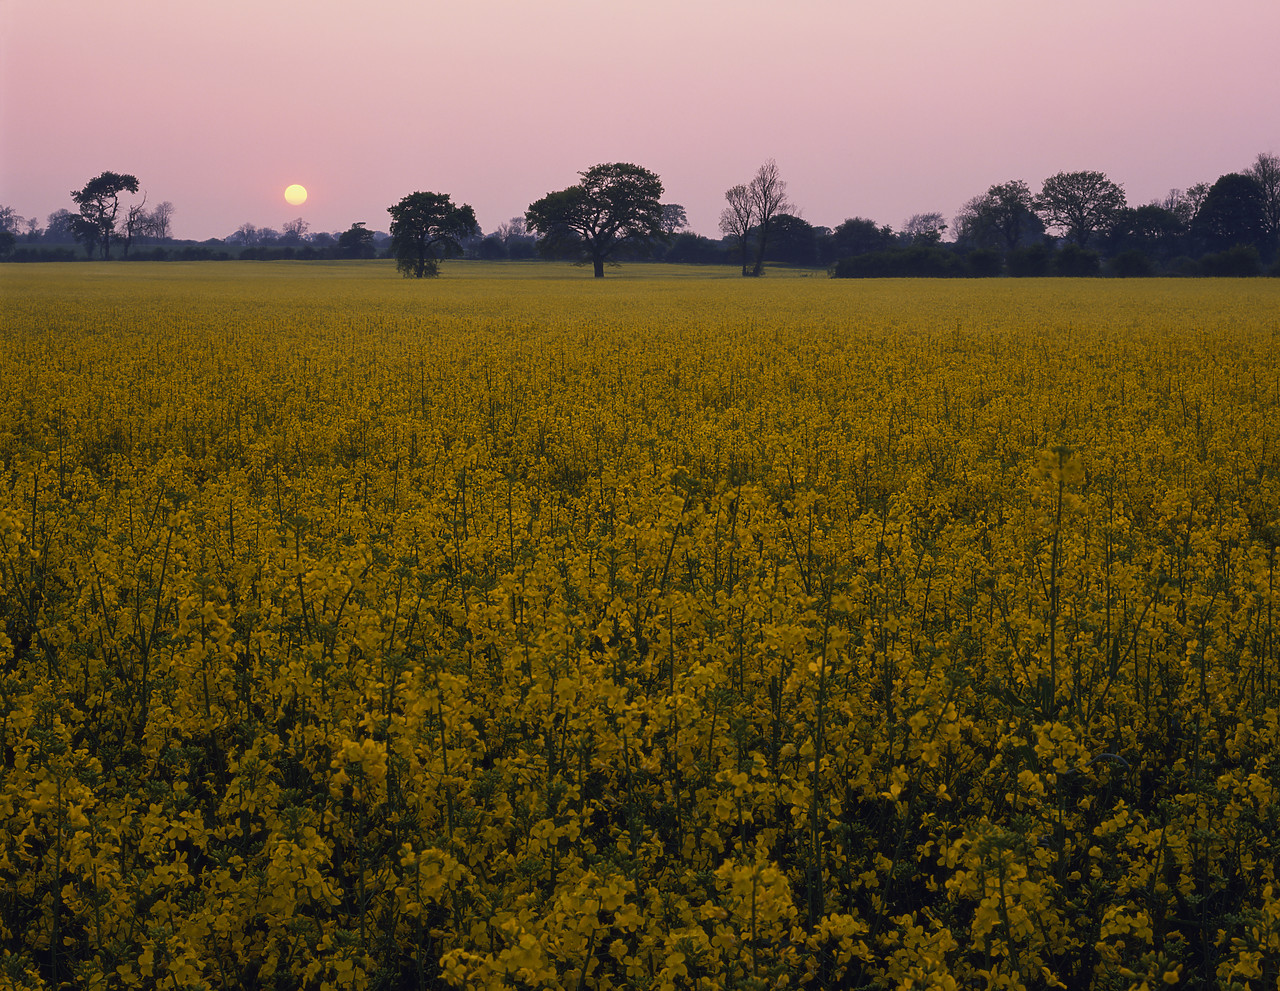 #923997-2 - Sunset over Field of Rape, near Marborough, Wiltshire, England